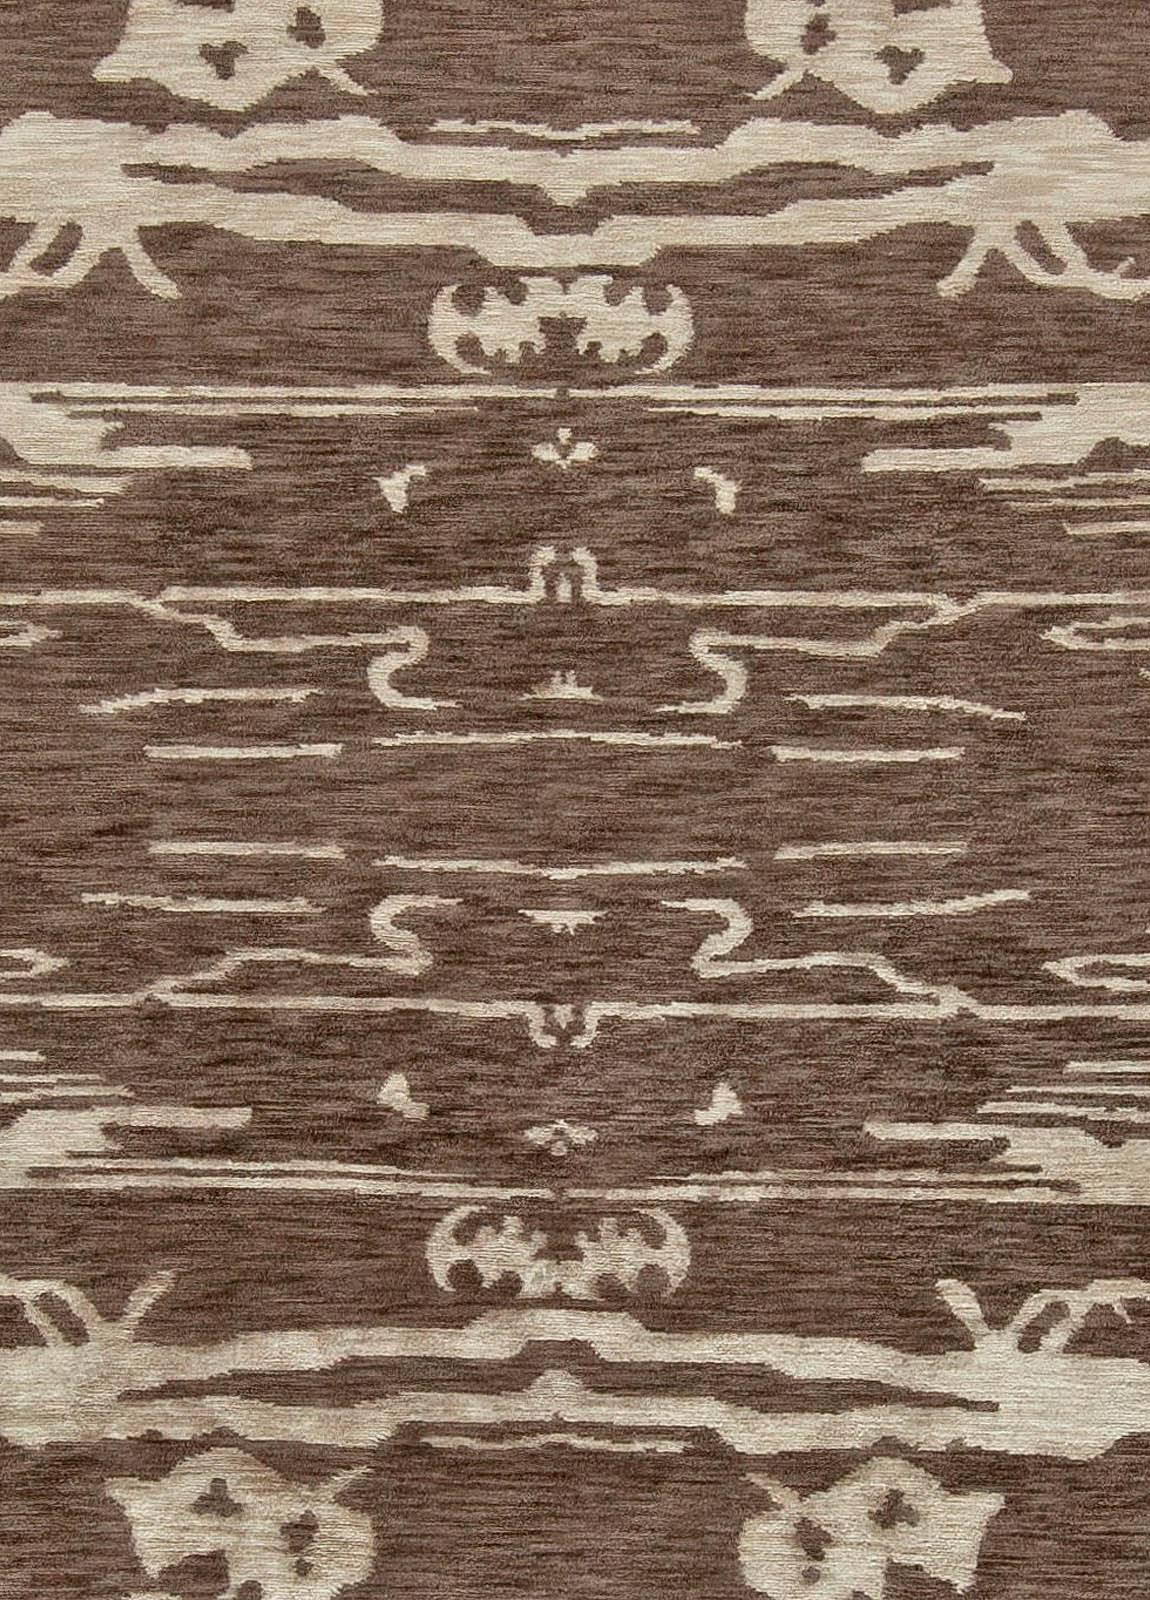 Contemporary floral design brown and white handmade wool rug by Doris Leslie Blau
Size: 12'0